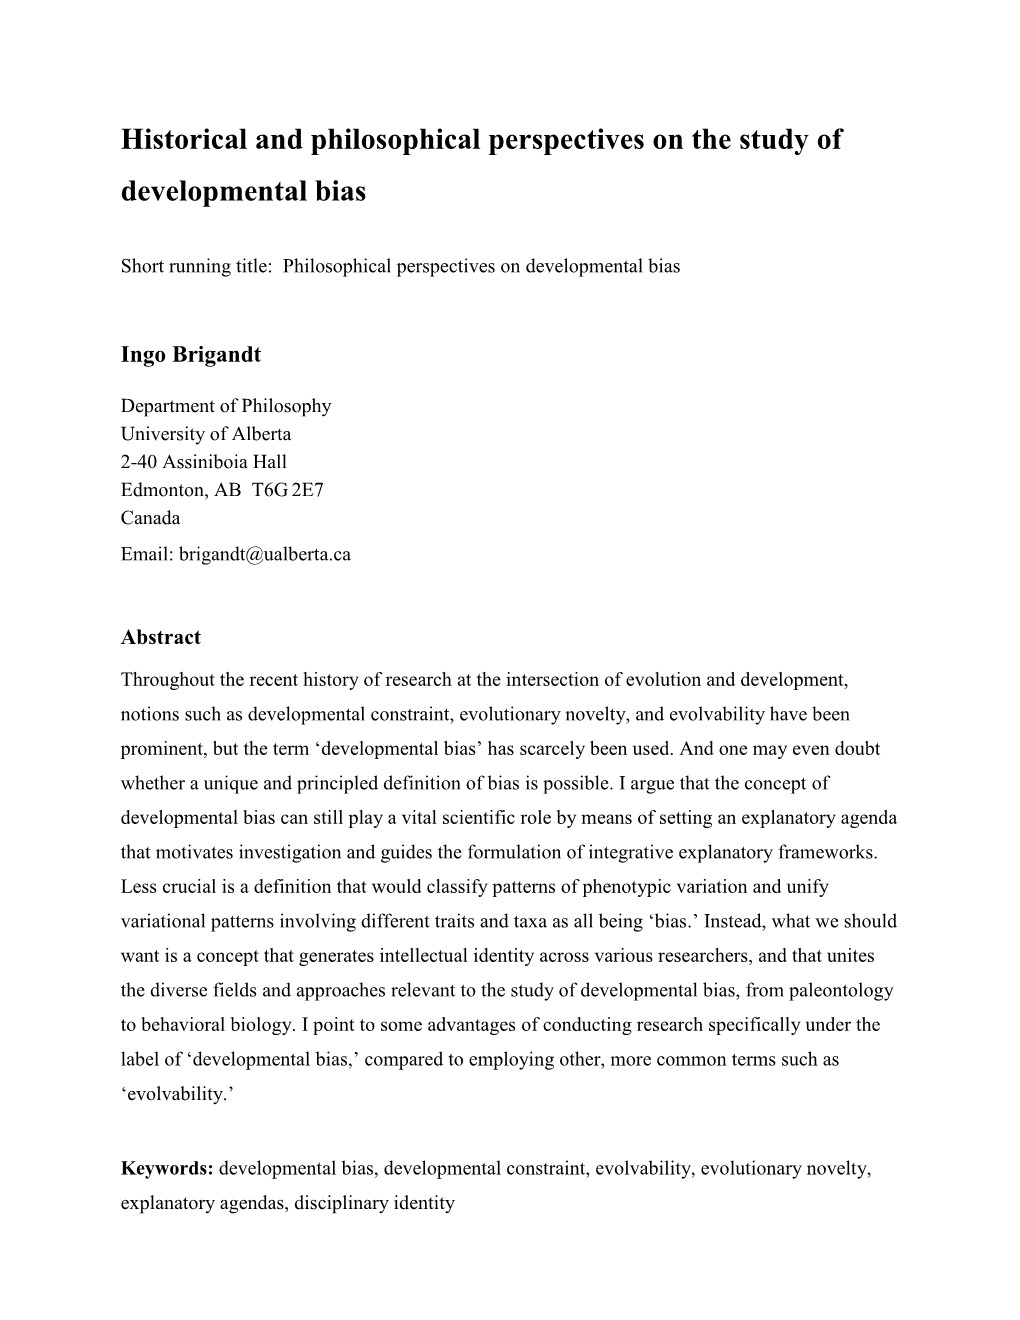 Historical and Philosophical Perspectives on the Study of Developmental Bias